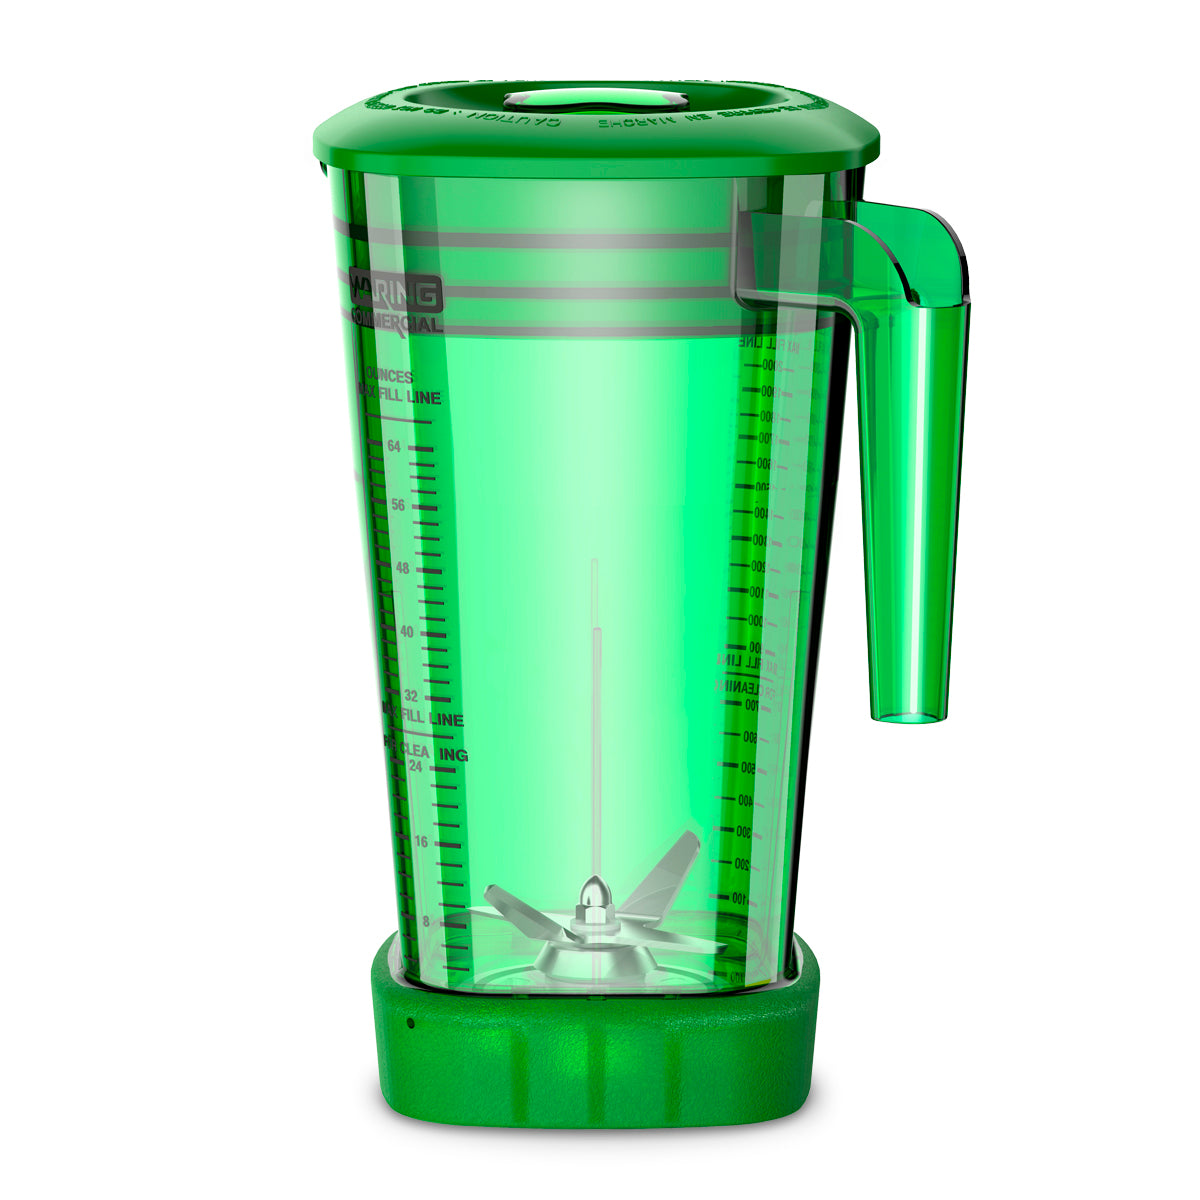 CAC95-12 - "The Raptor" 64-oz. BPA-Free Green Copolyester Container Complete with Blade and Lid — MX Series